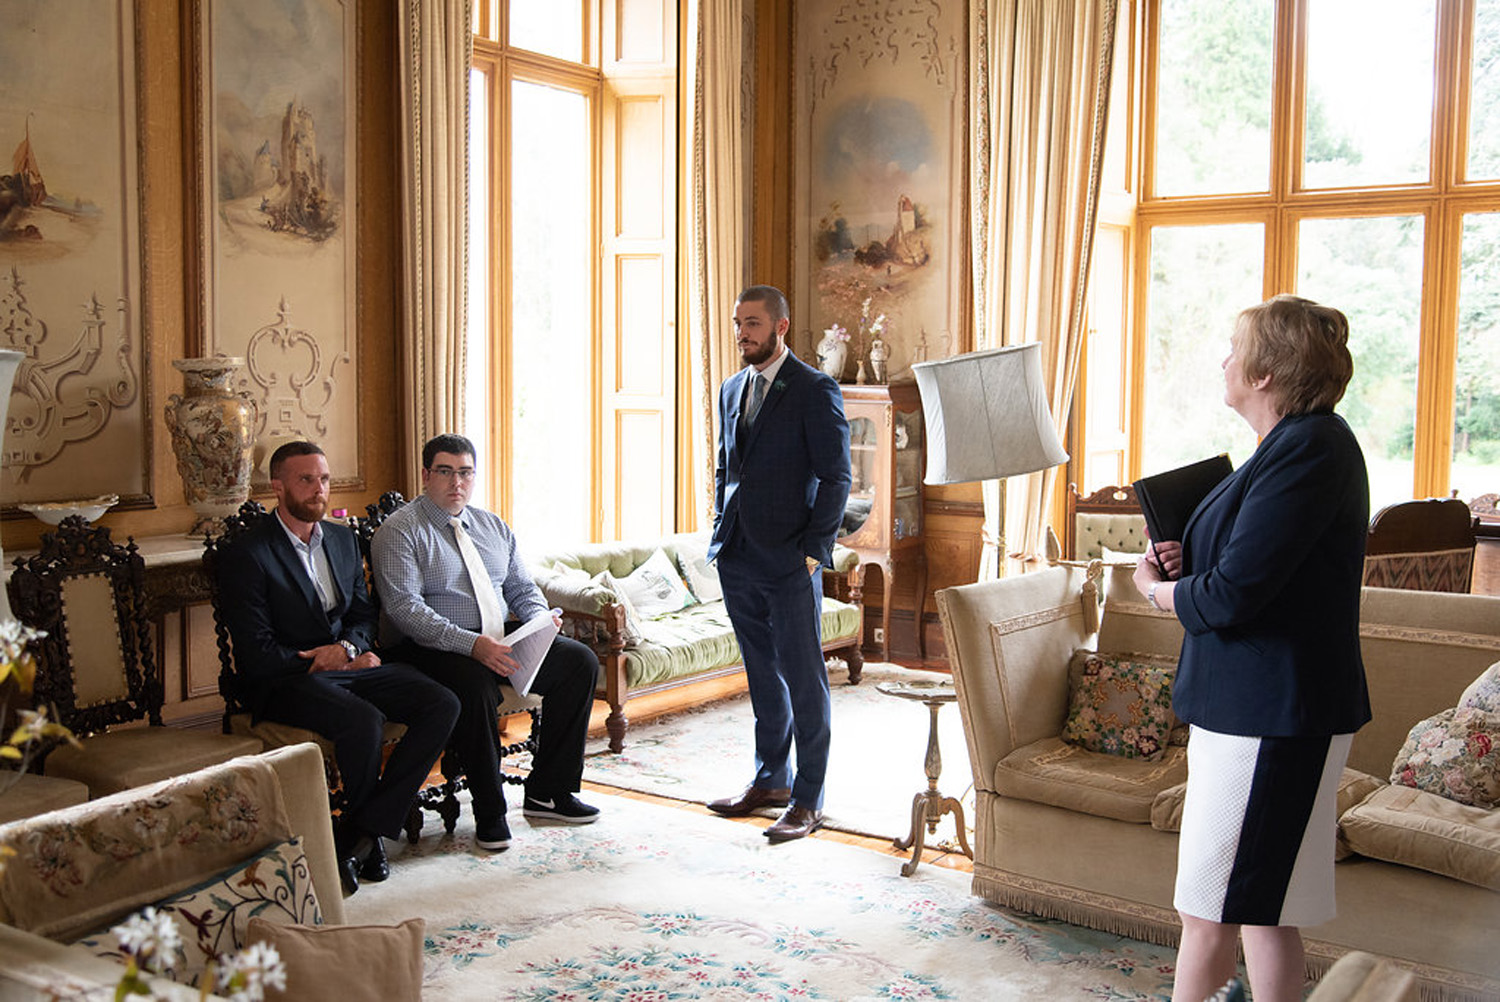 A fun Elopement at an Irish Manor House Adventure waiting for the bride 